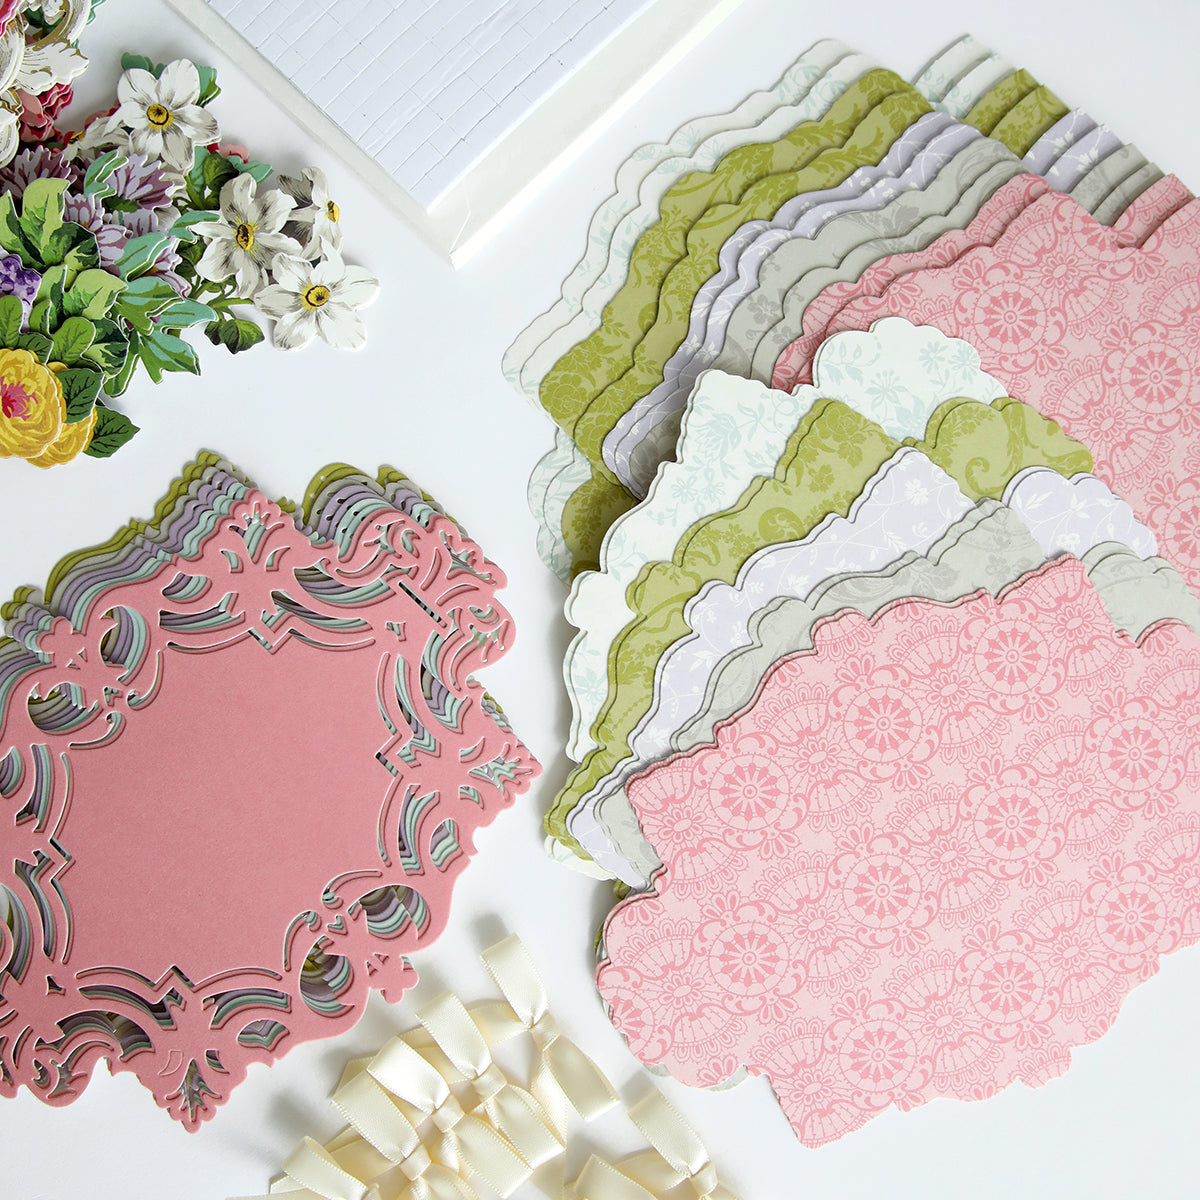 A variety of Simply Birthday Easel Card Making Kit papers and embellishments for cardmaking are laid out on a table, ready to create beautiful handmade cards.